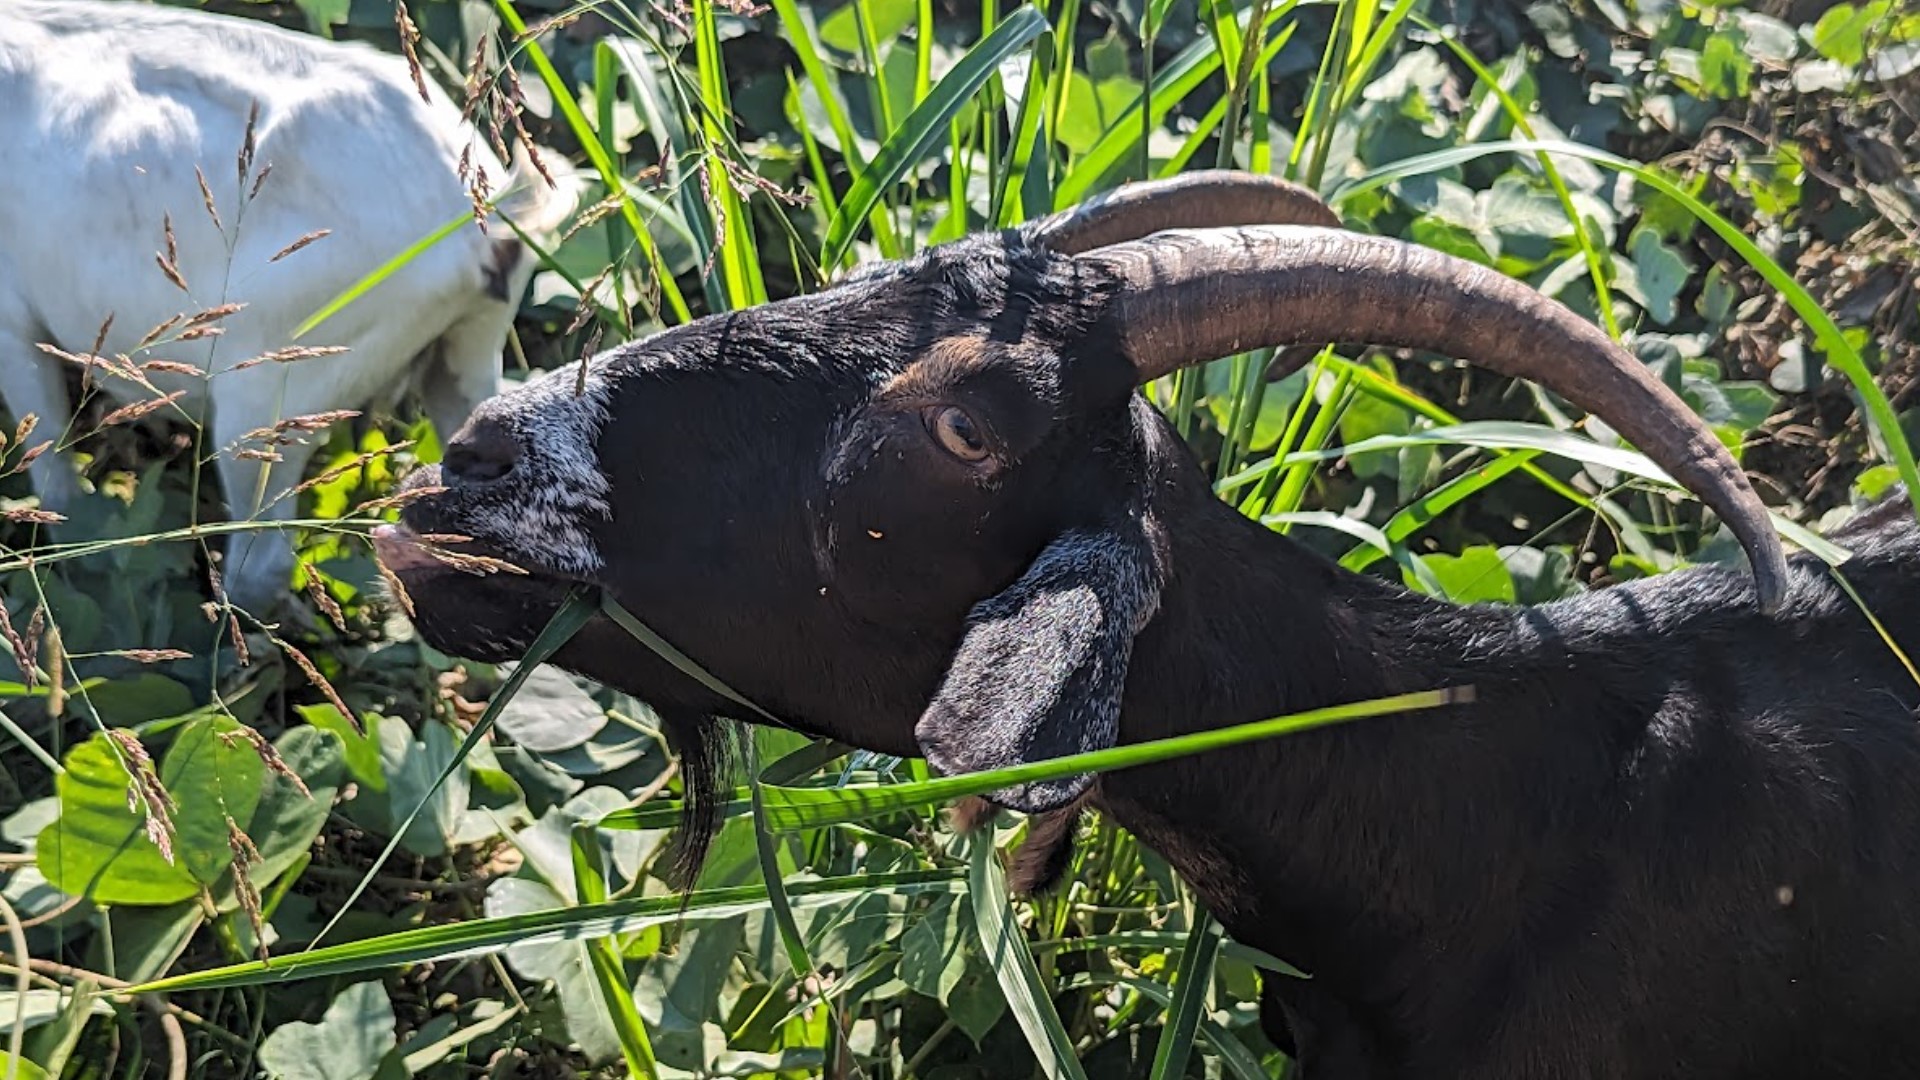 ​Goats were recently employed to eat the kudzu invasive plant around Silver Comet Linear Park.